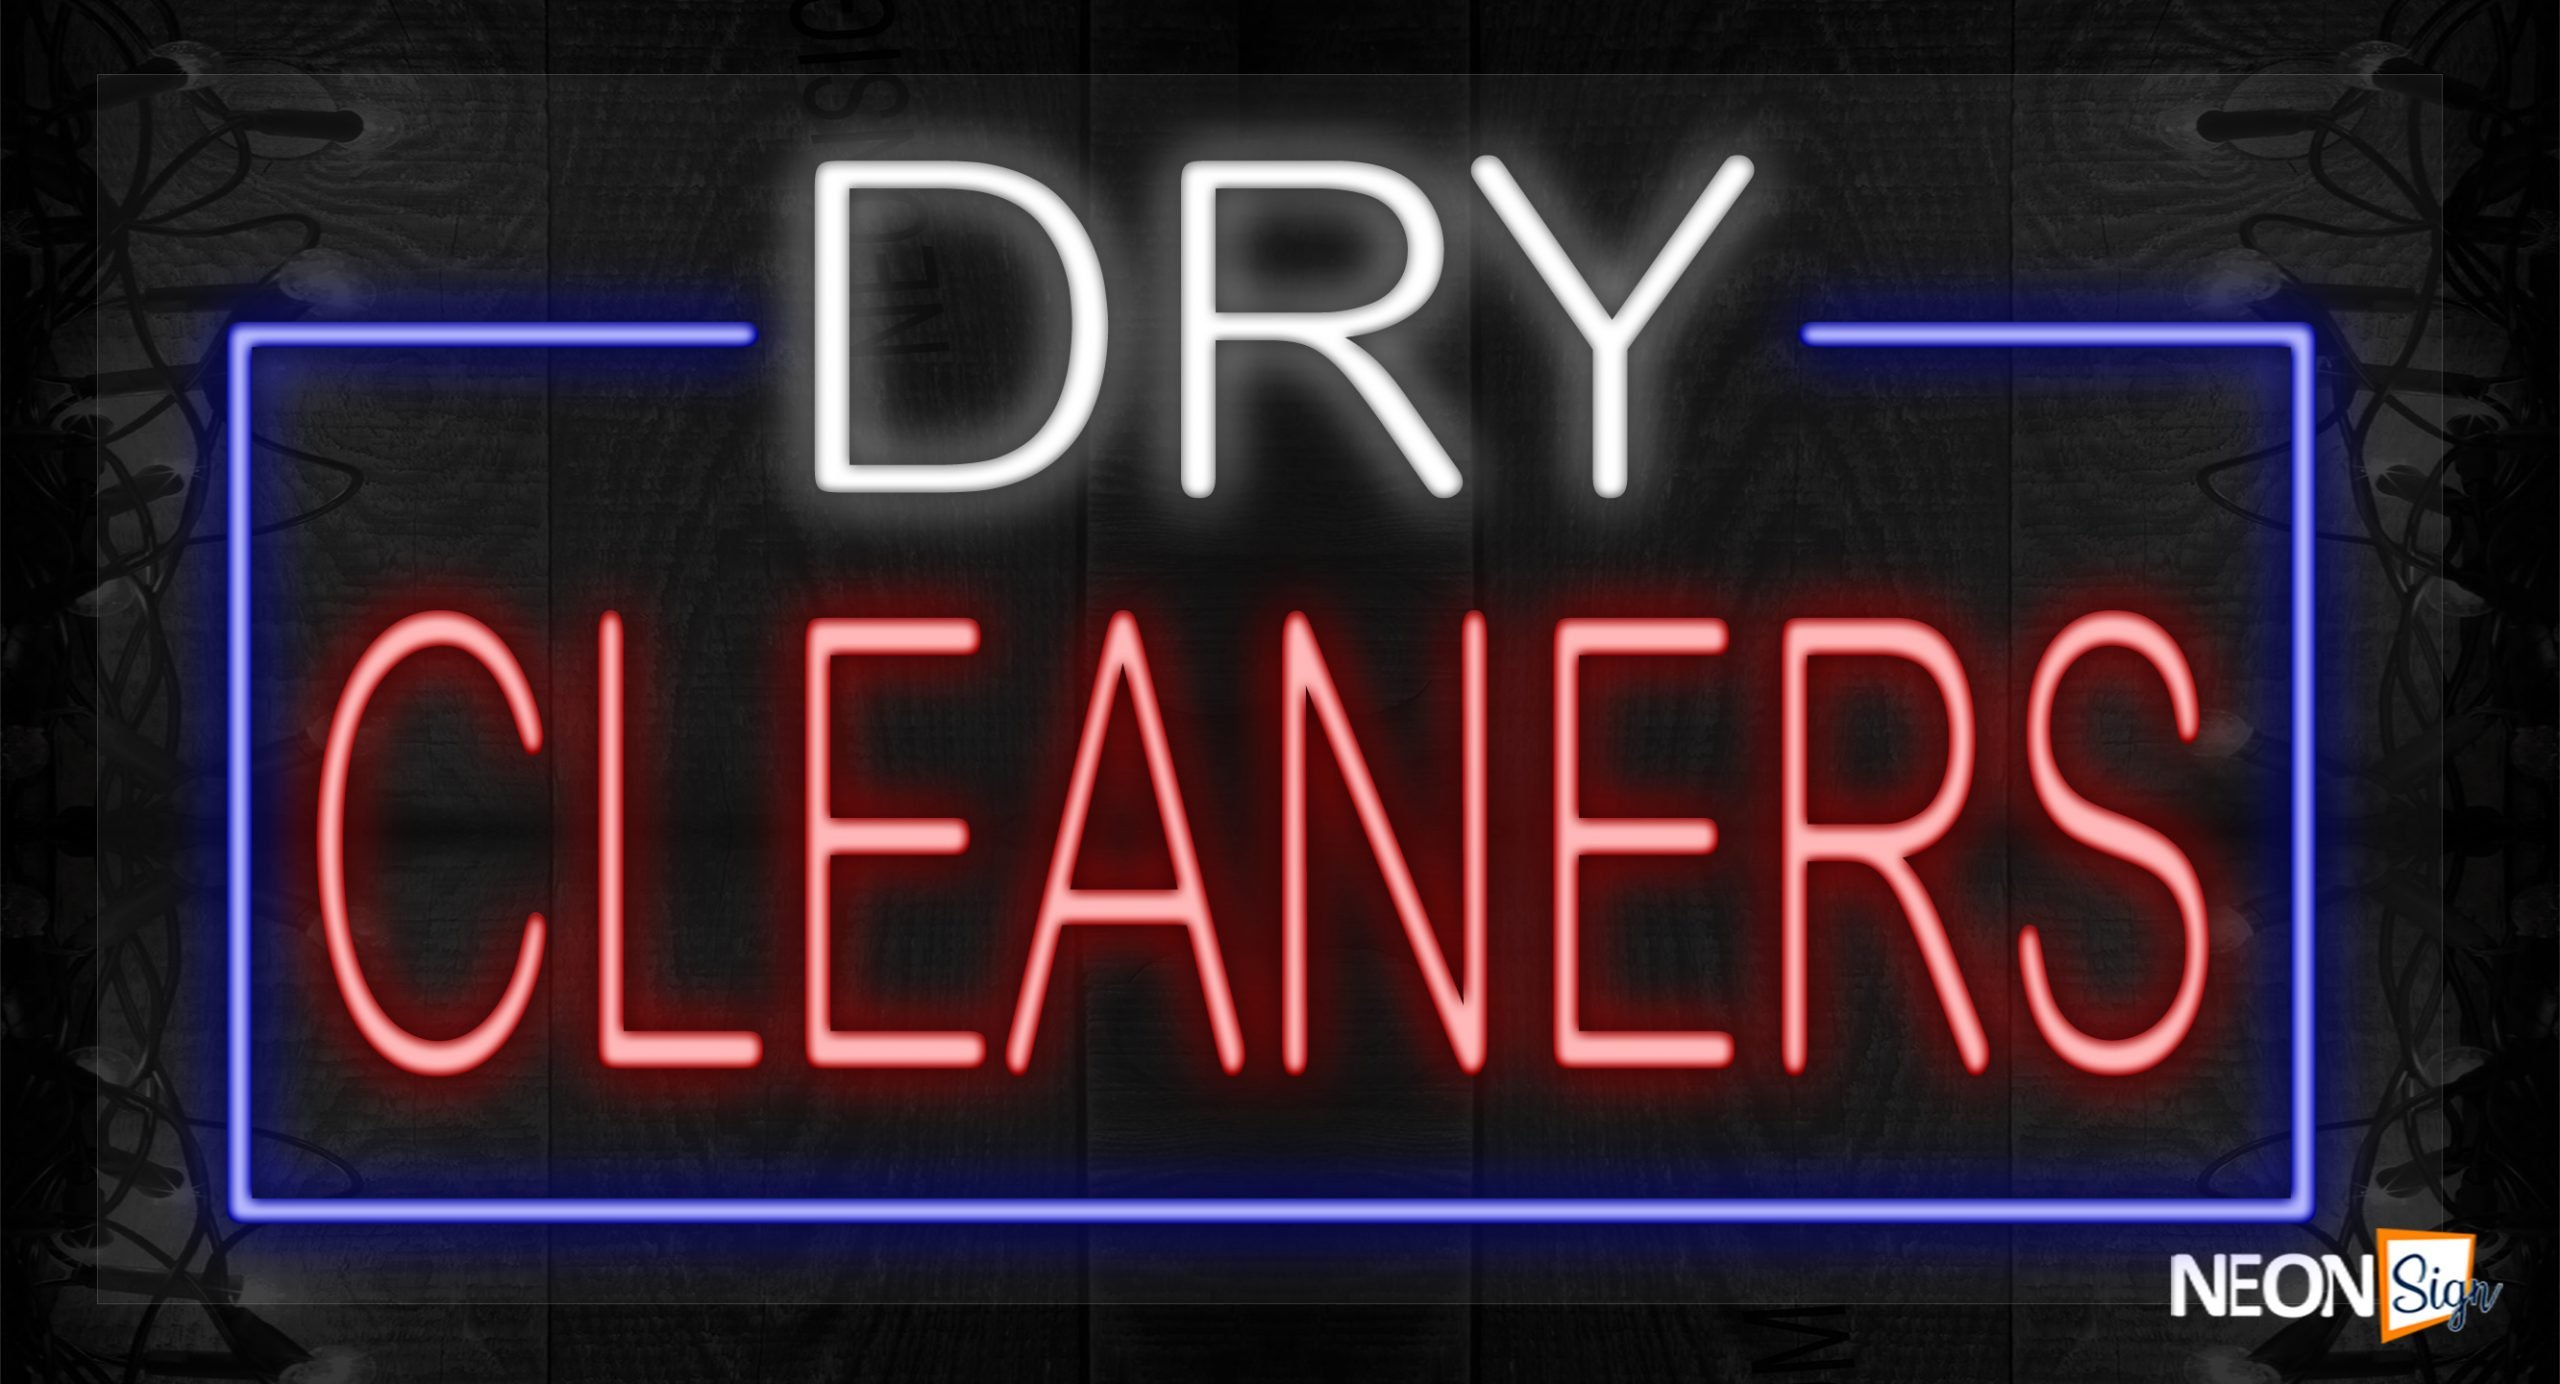 Image of Dry Cleaners with blue border LED Flex